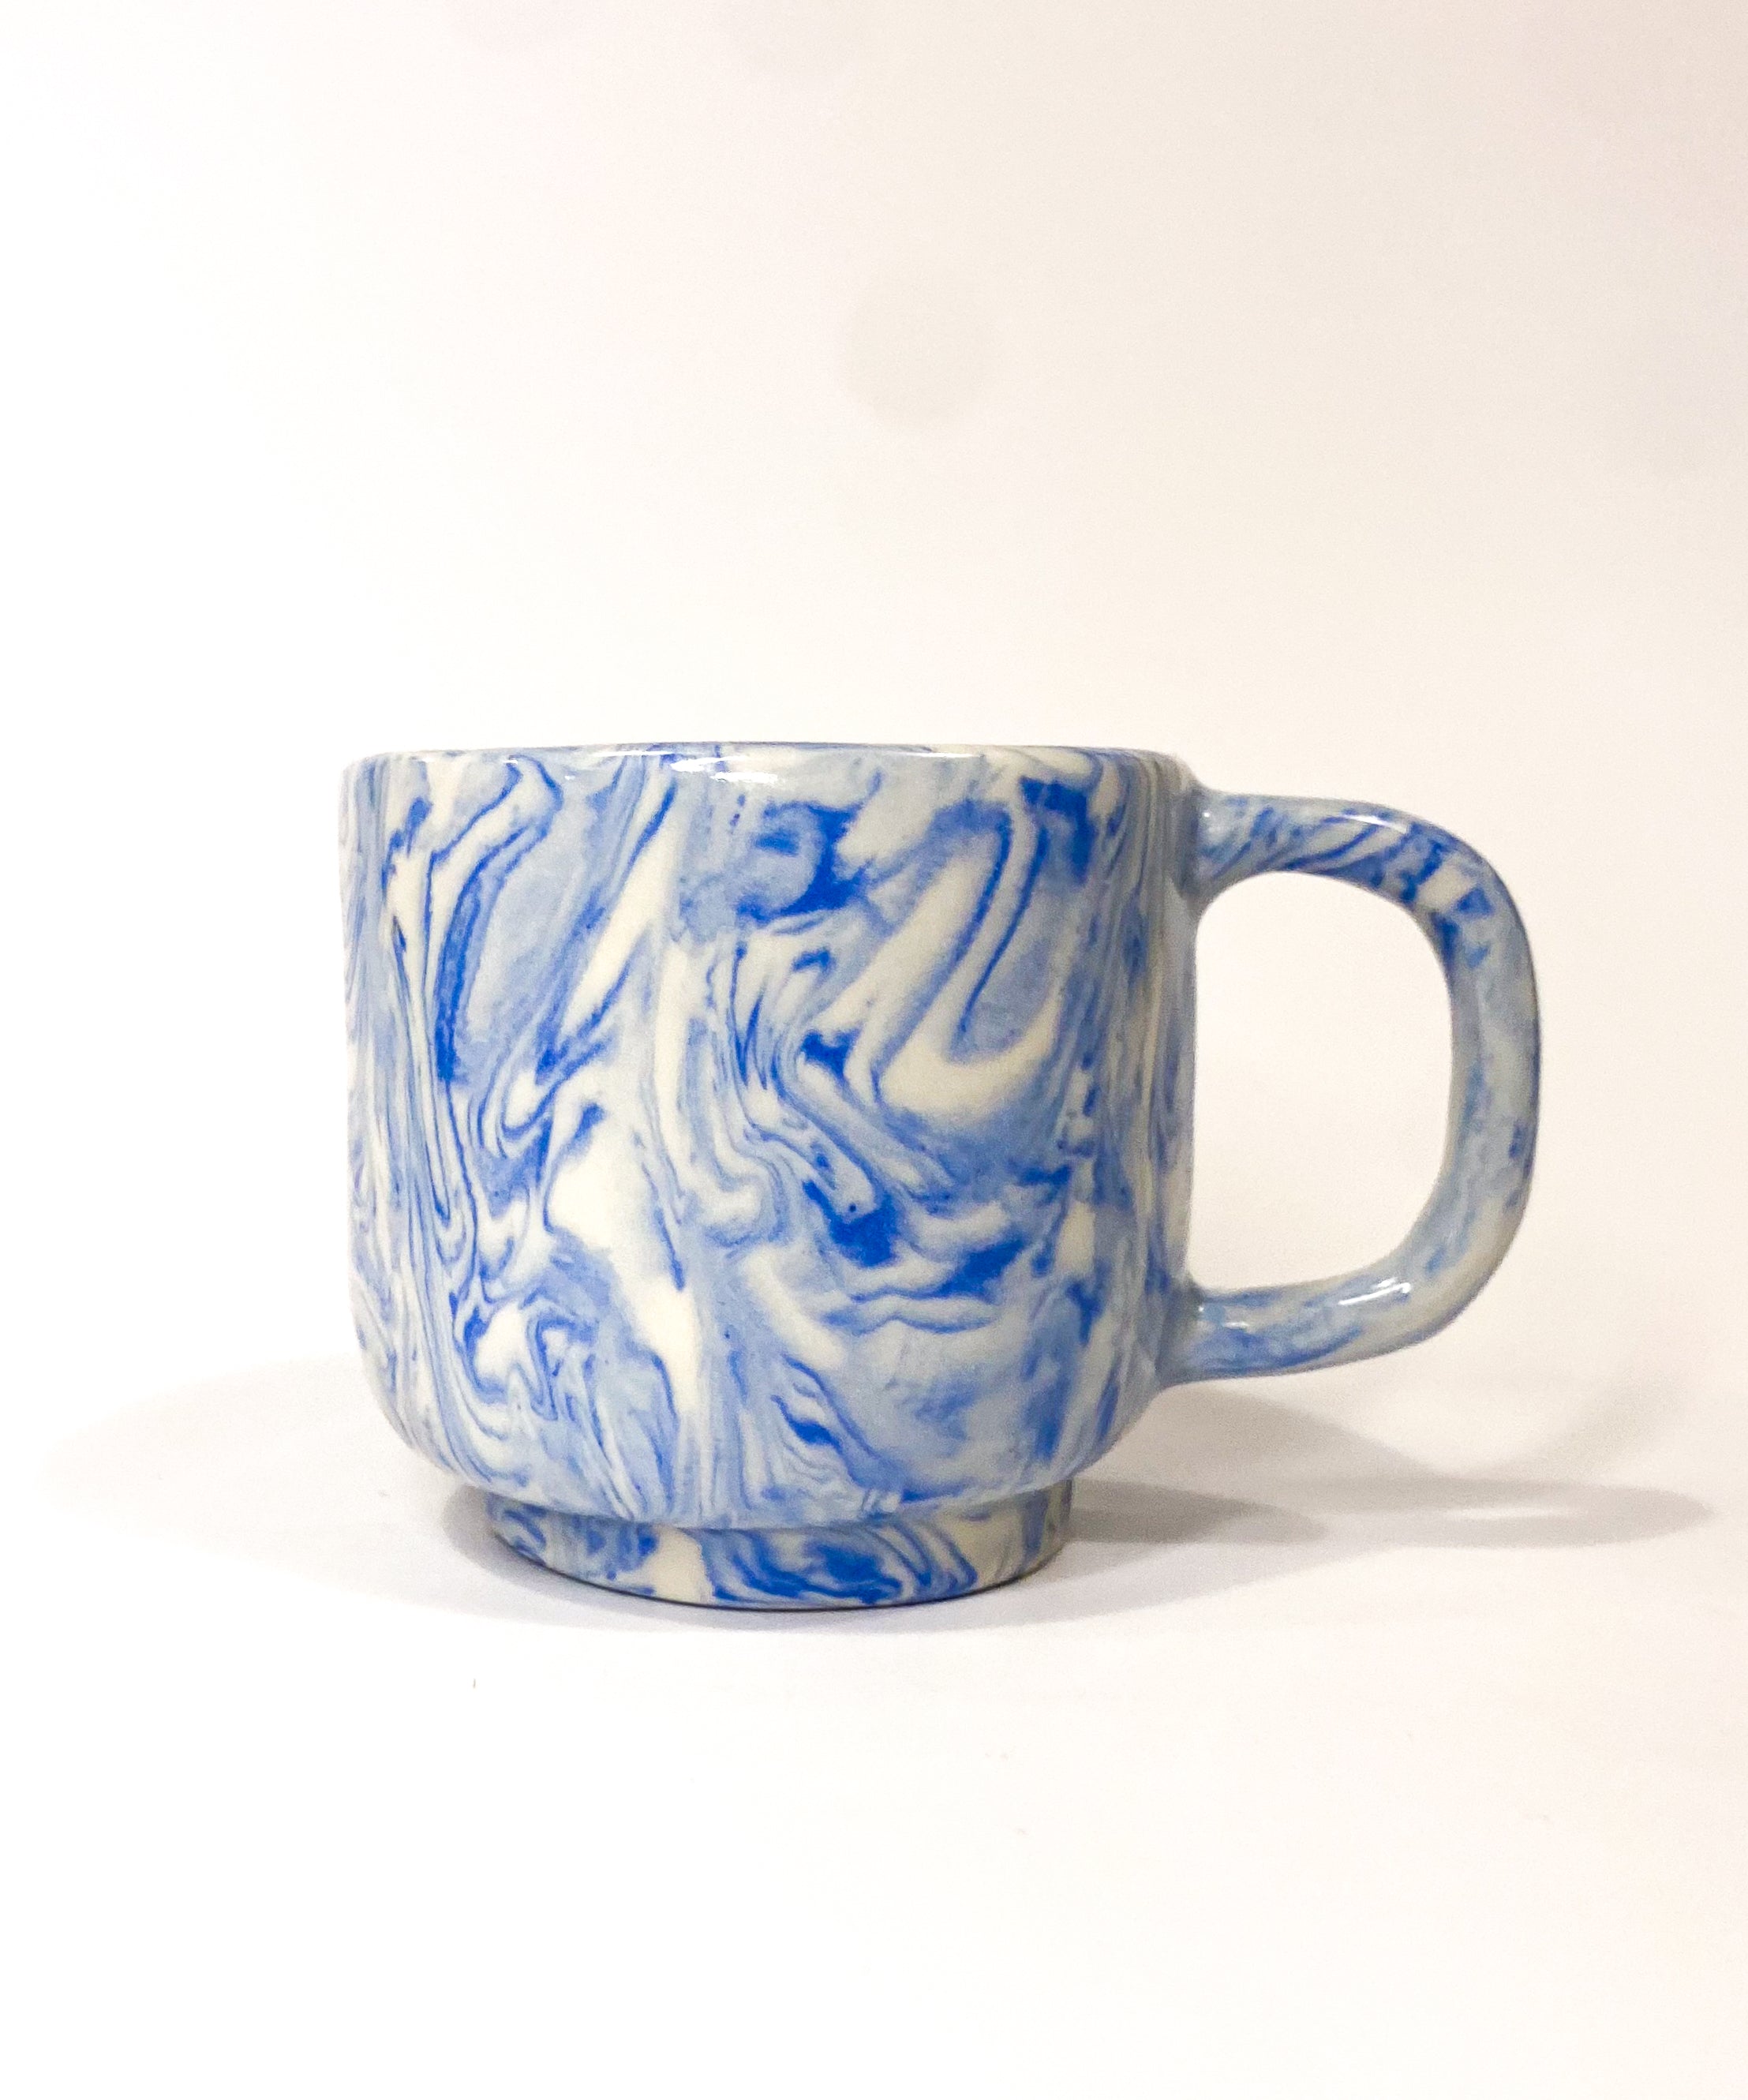 Isabel Rower Marbled Mini Teacup in Blue